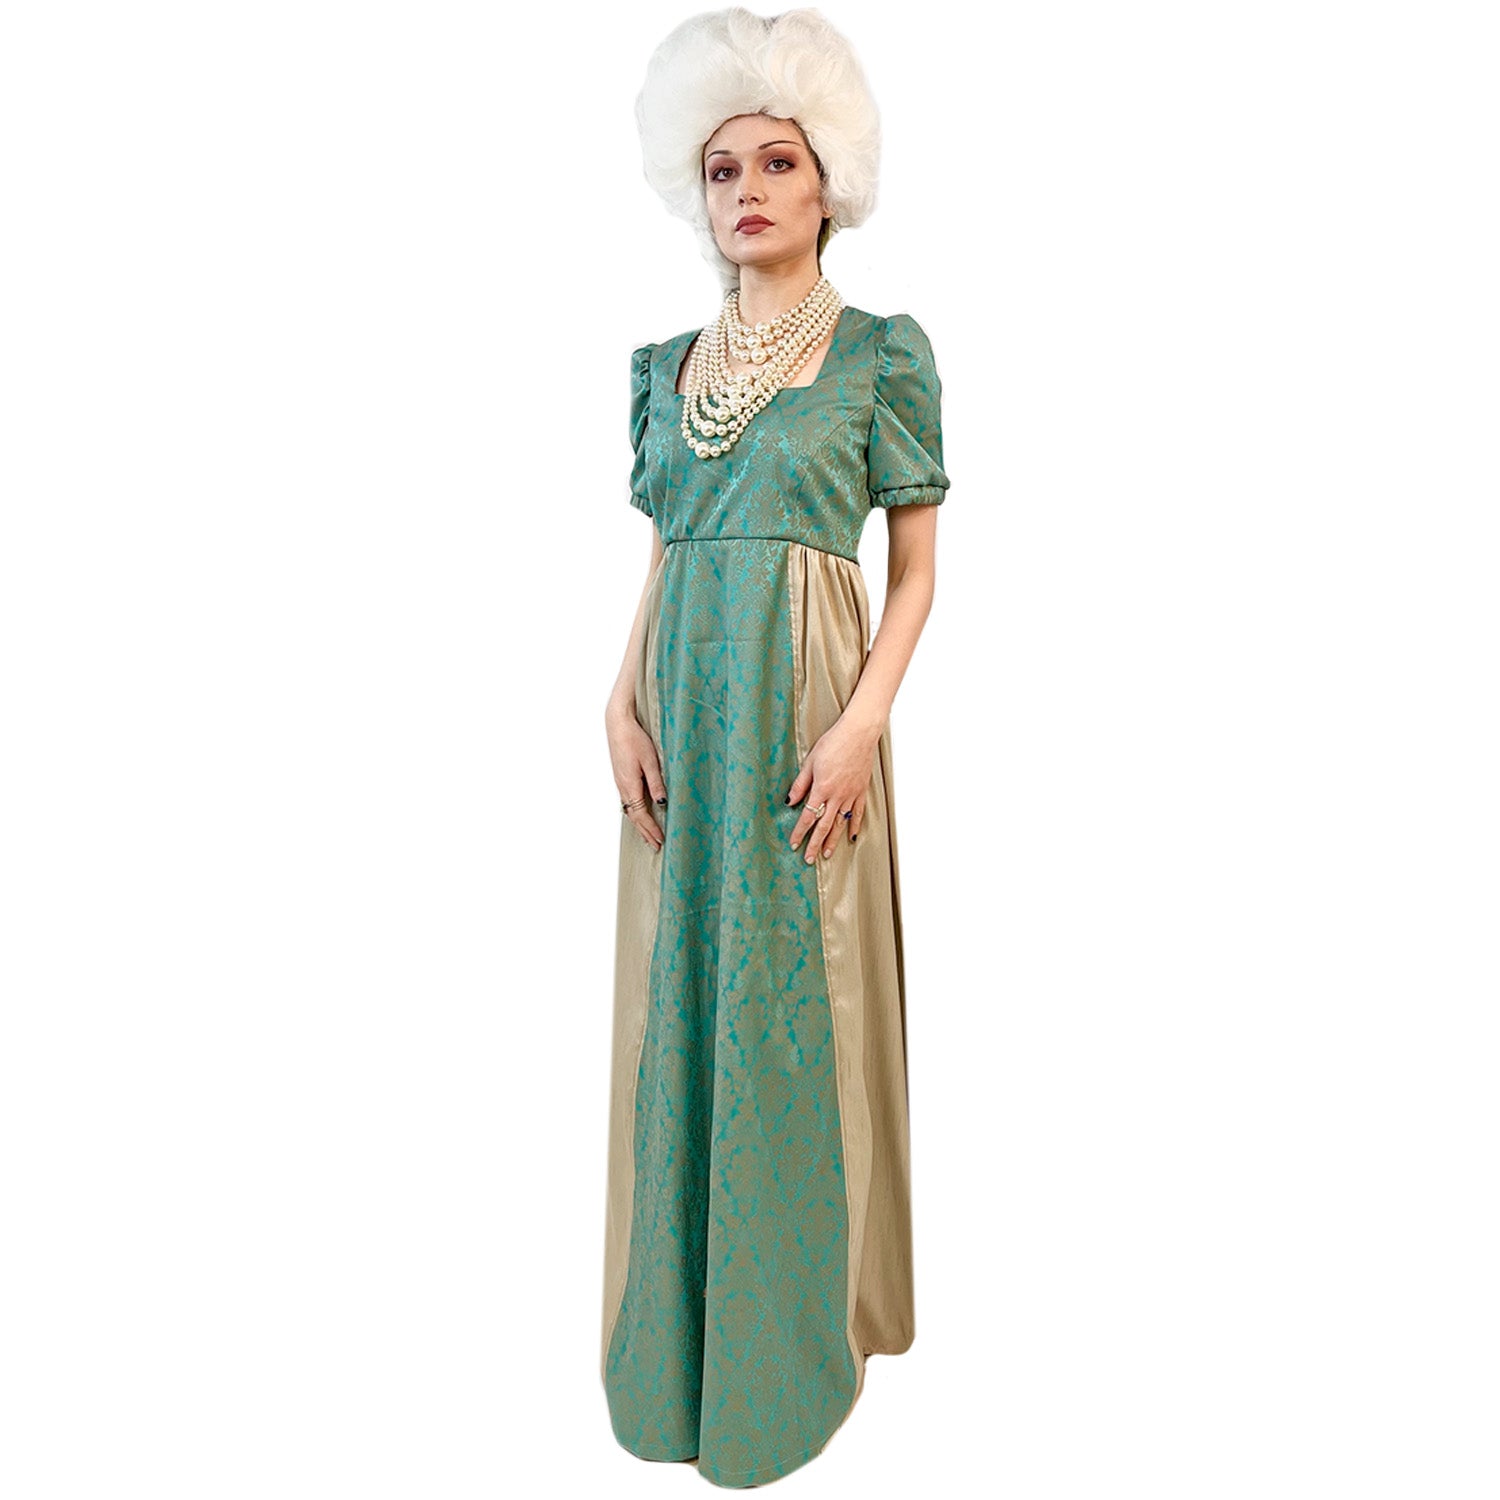 Regency Gold And Green Square Neck Women's Dress Adult Costume